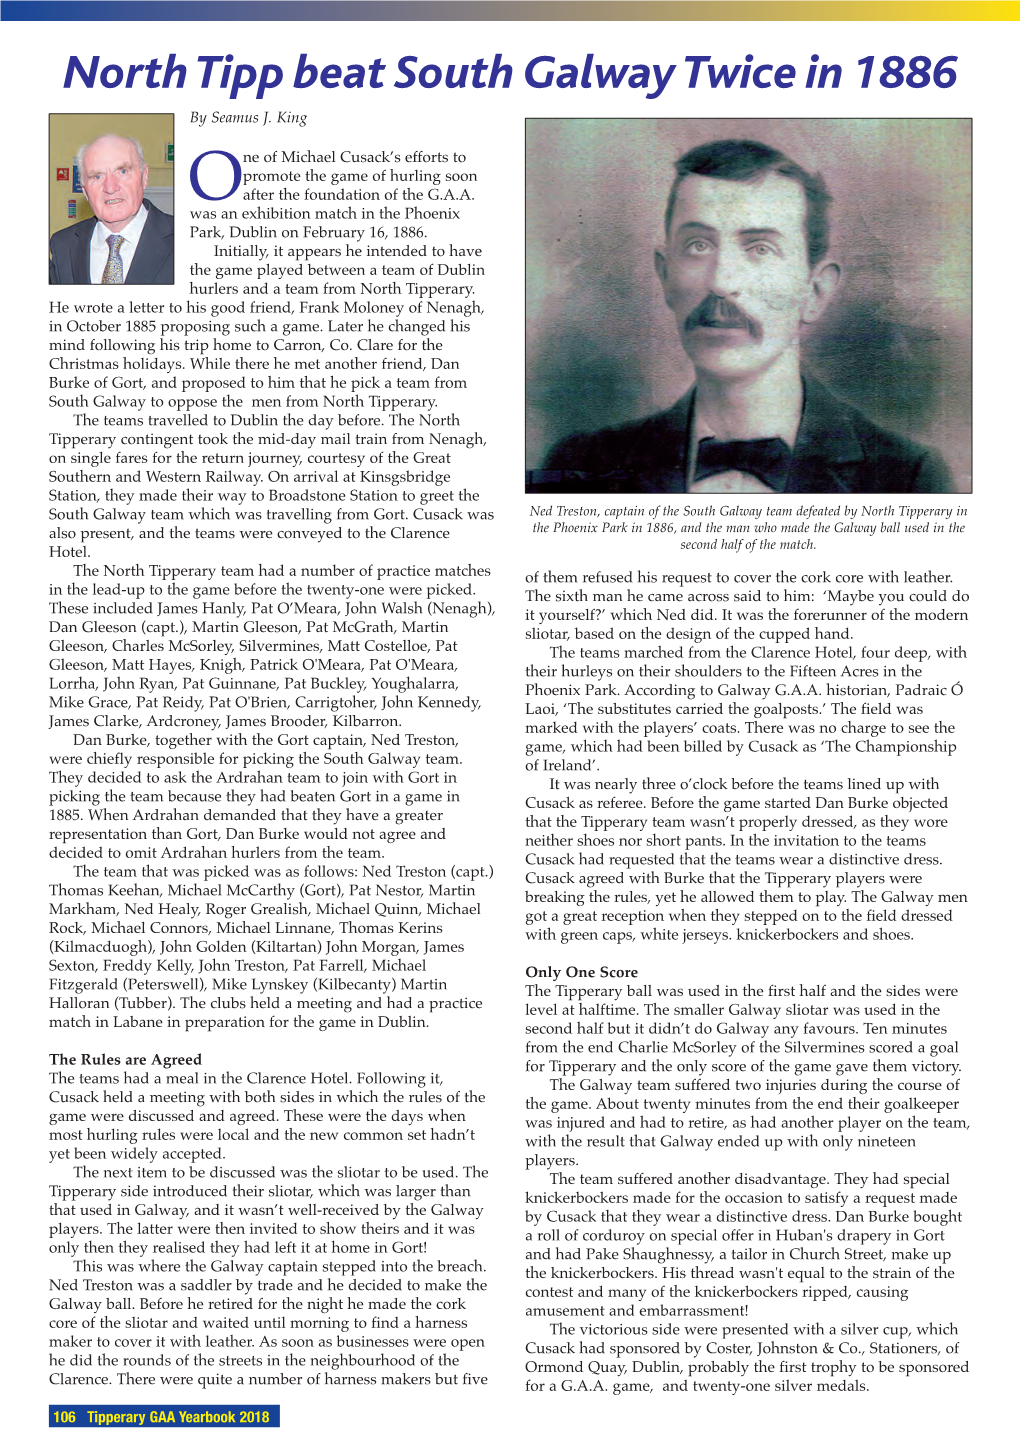 1 Tipperary Yearbook 2018 Layout 1